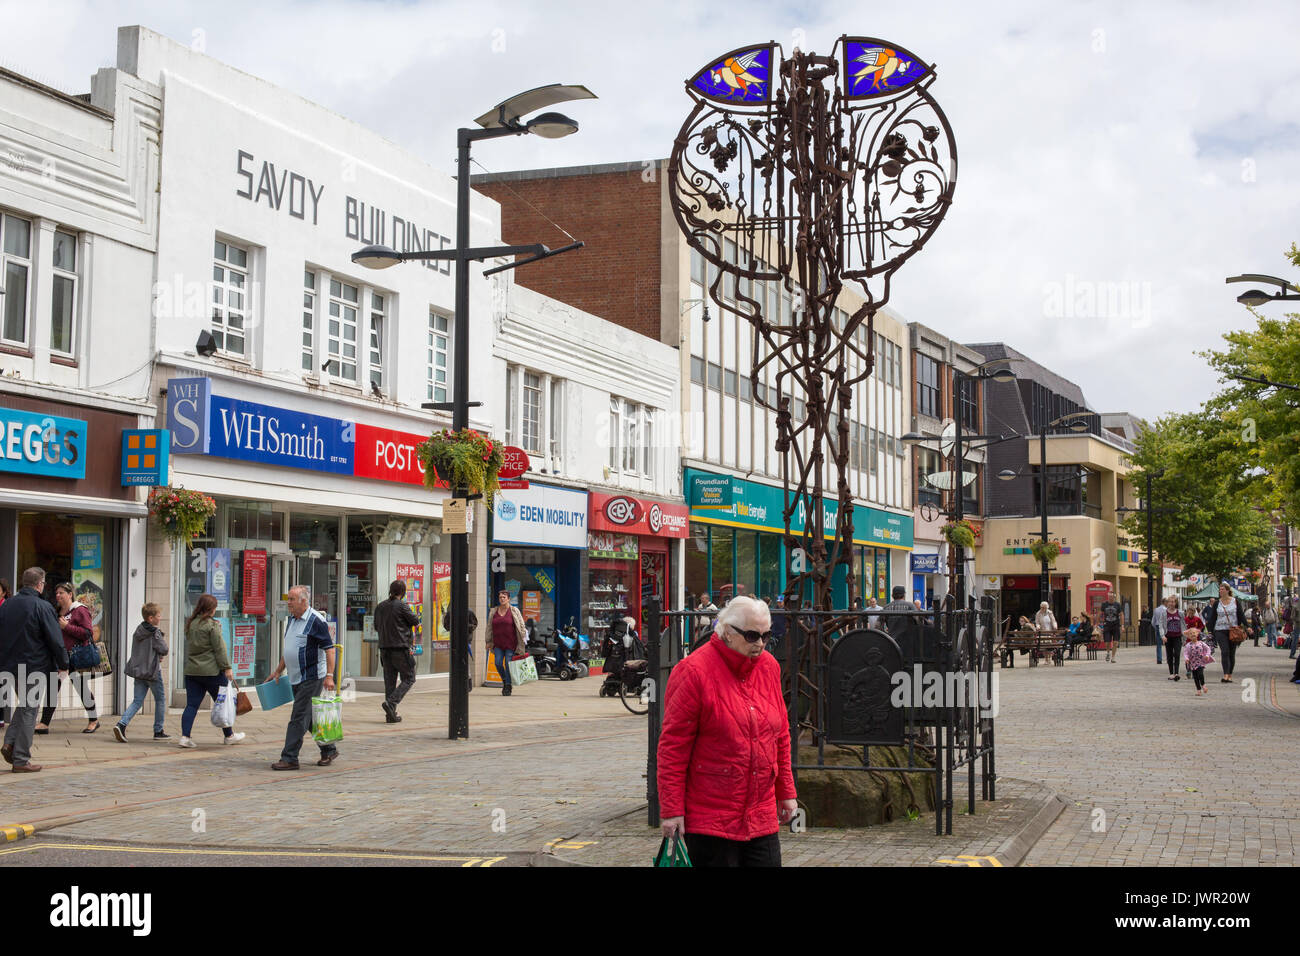 Fareham, a small market town in Hampshire. The photo shows the pedestrianised West Street, the town's main shopping road. Stock Photo